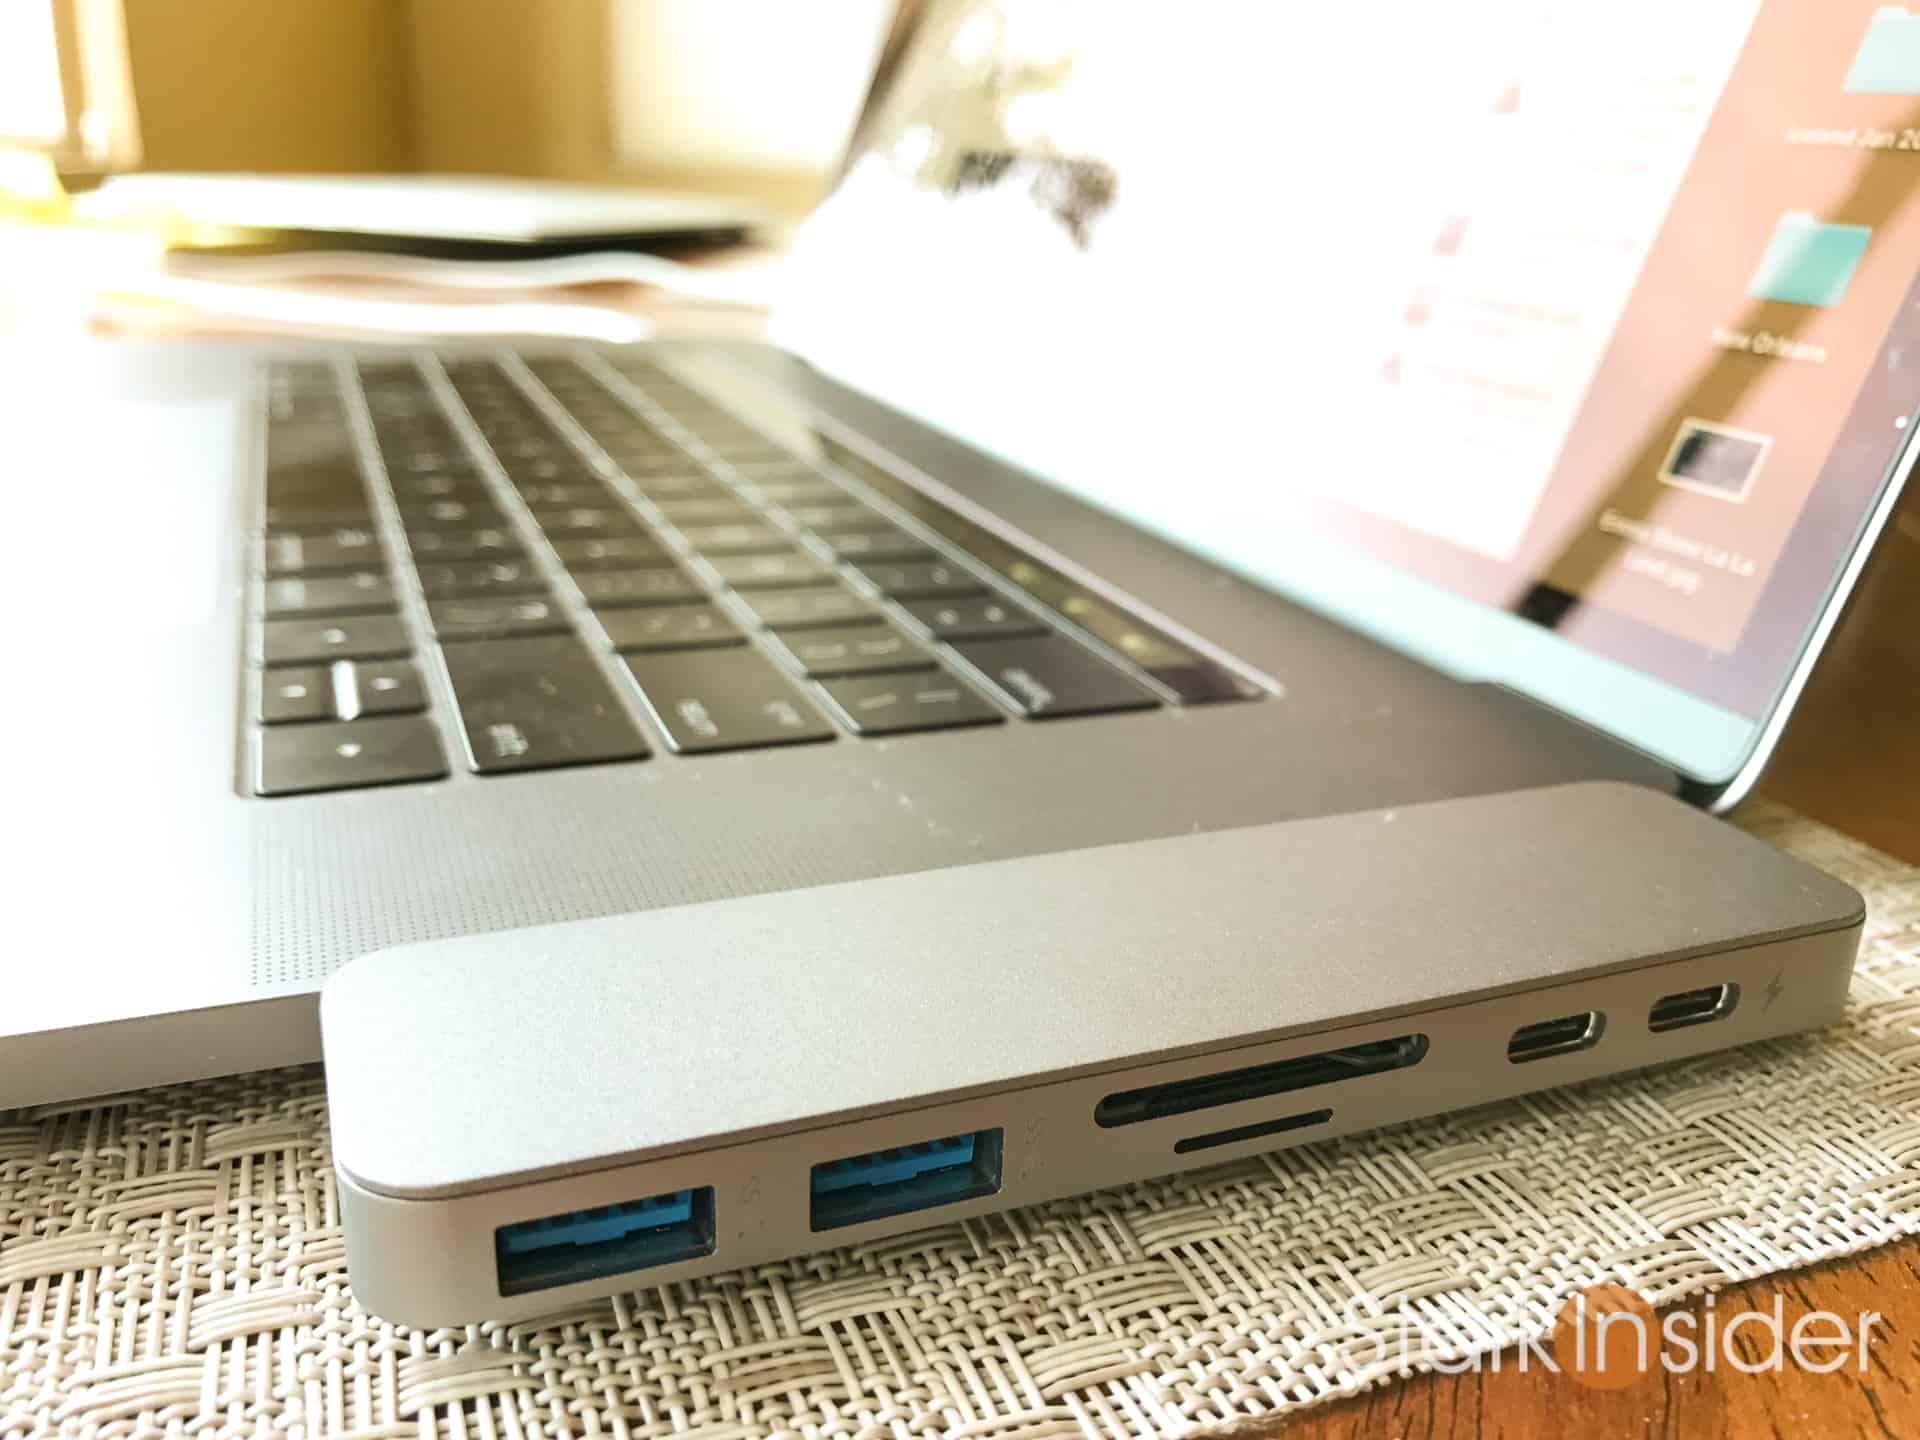 Hands-on: HyperDrive Thunderbolt 3 USB-C Hub might be the ultimate MacBook  Pro dongle [Video] - 9to5Mac